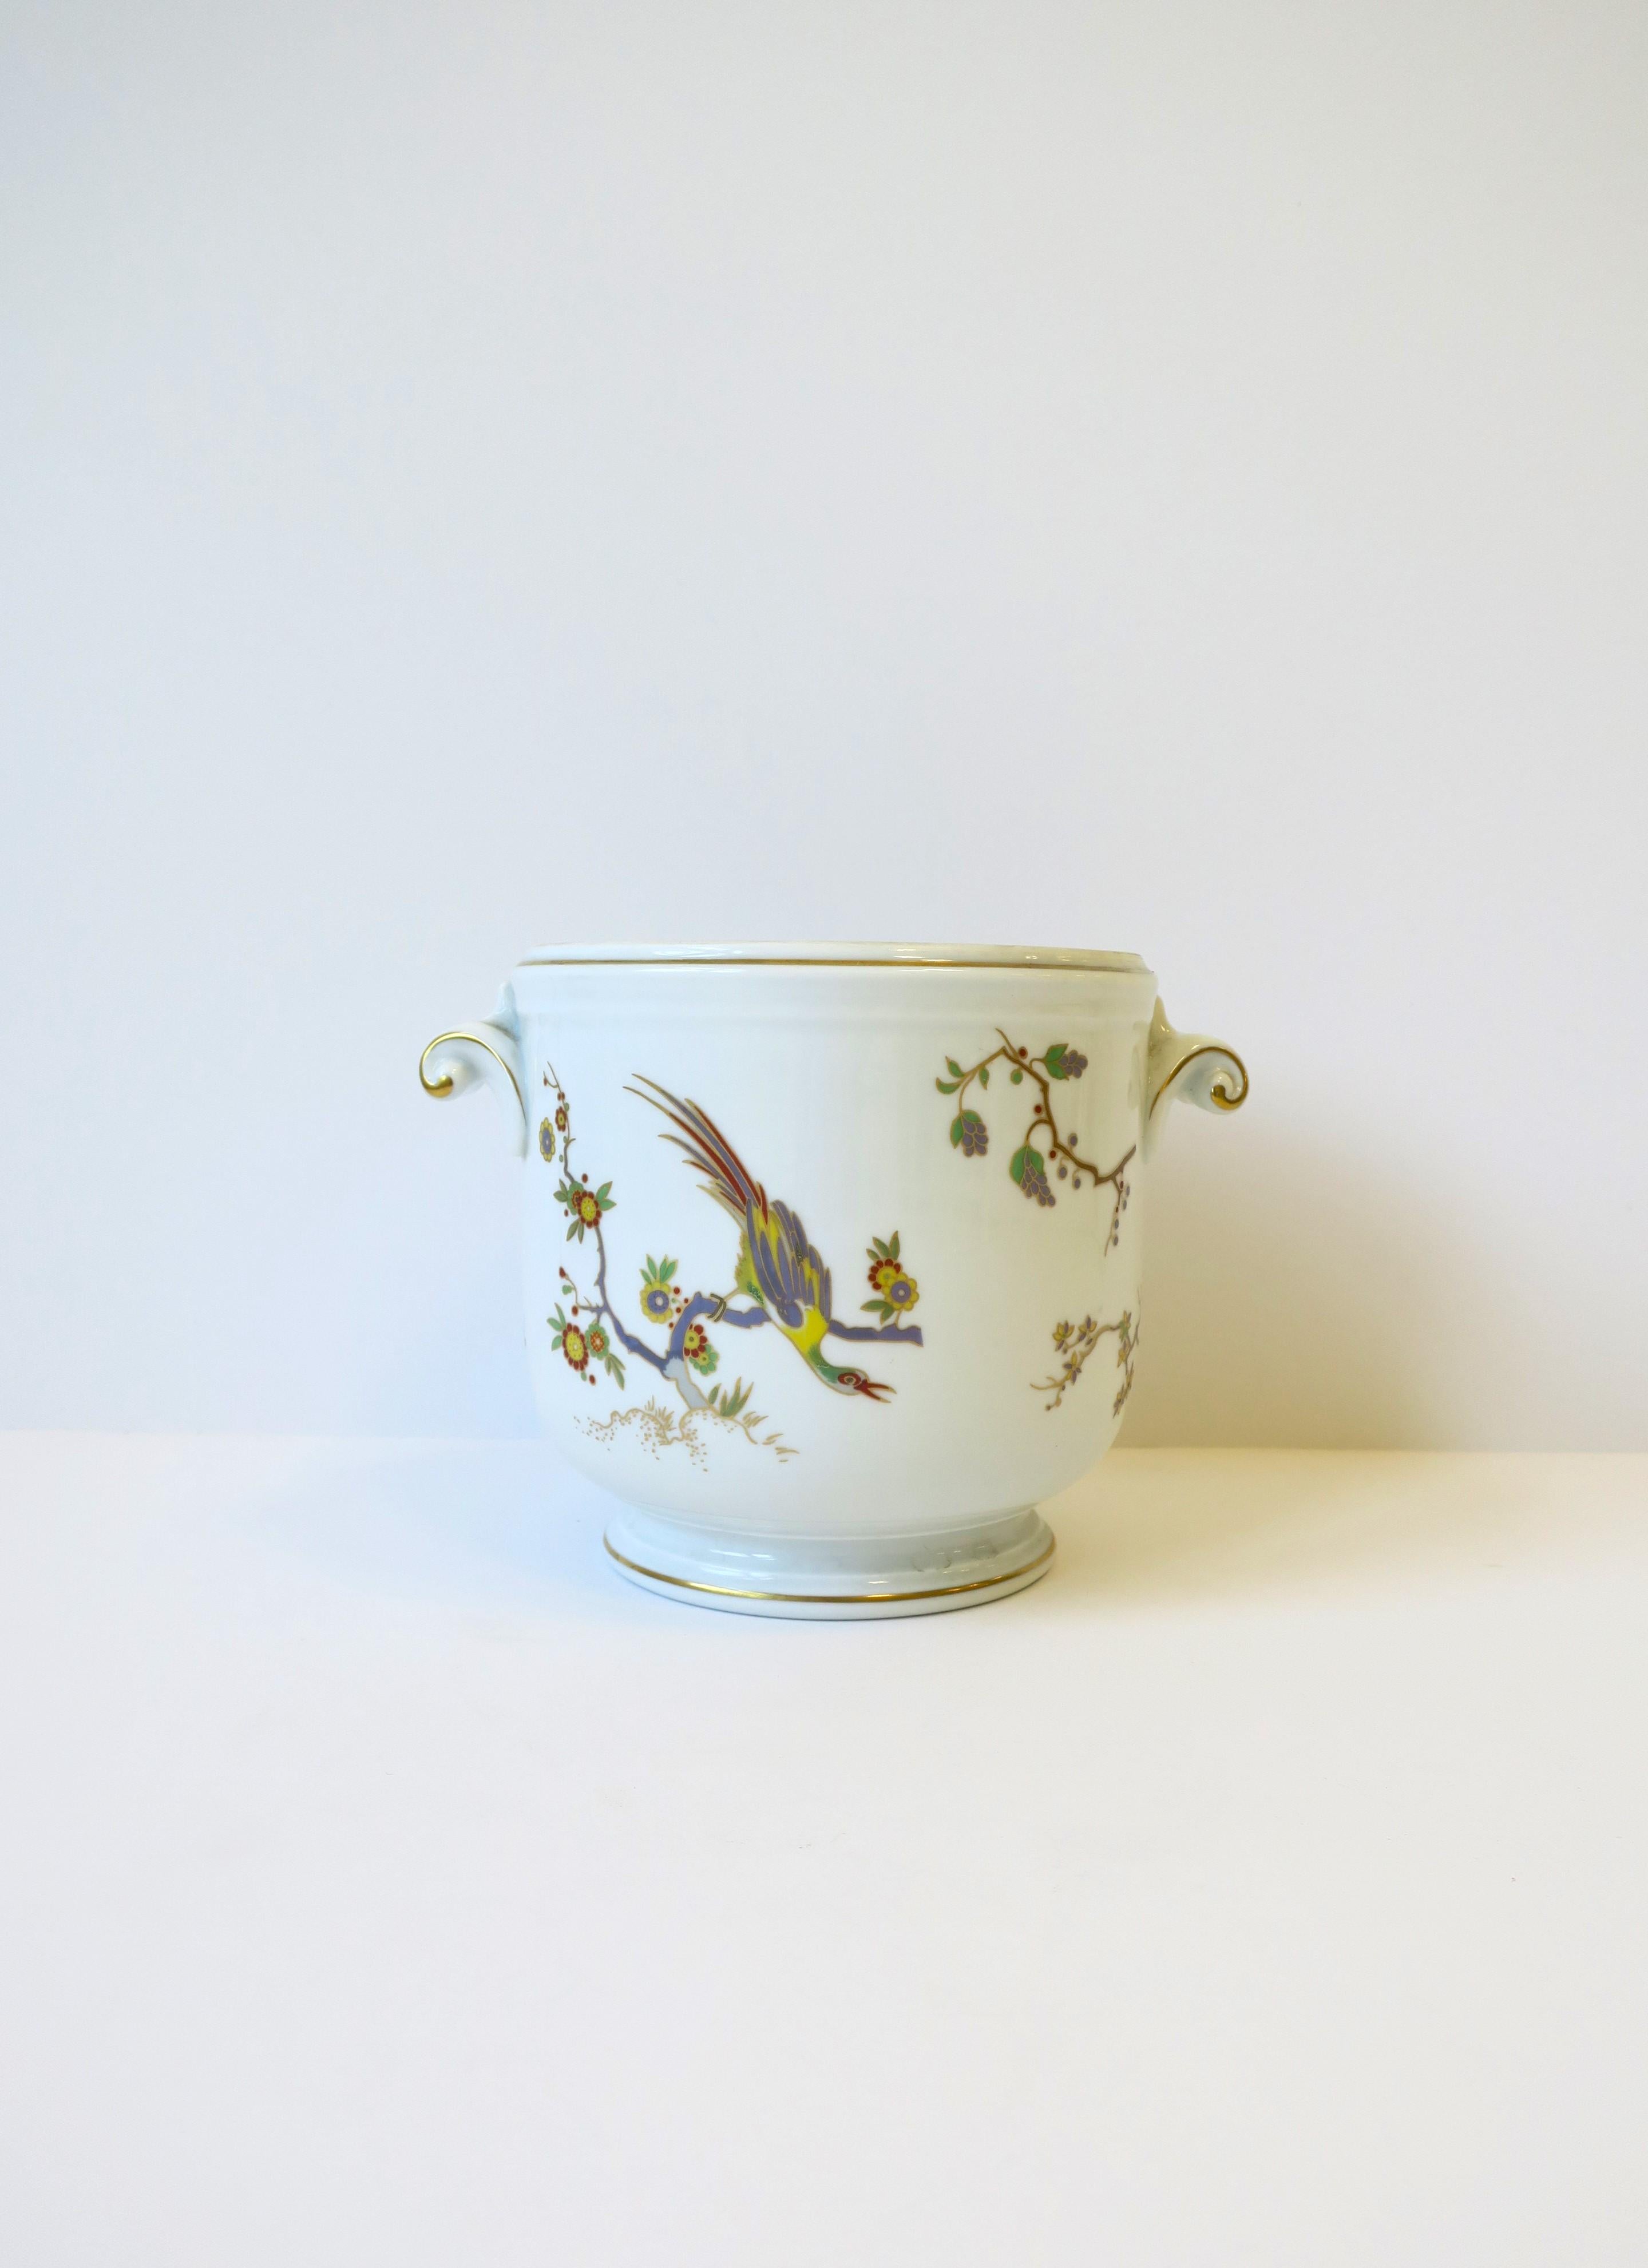 A beautiful, vintage Richard Ginori porcelain 'Paradise' cachepot jardiniere flower or plant pot holder with gold detail and multi-colored bird and flower design, circa mid to late-20th century, Italy. Piece has scrolled gold accented handles on